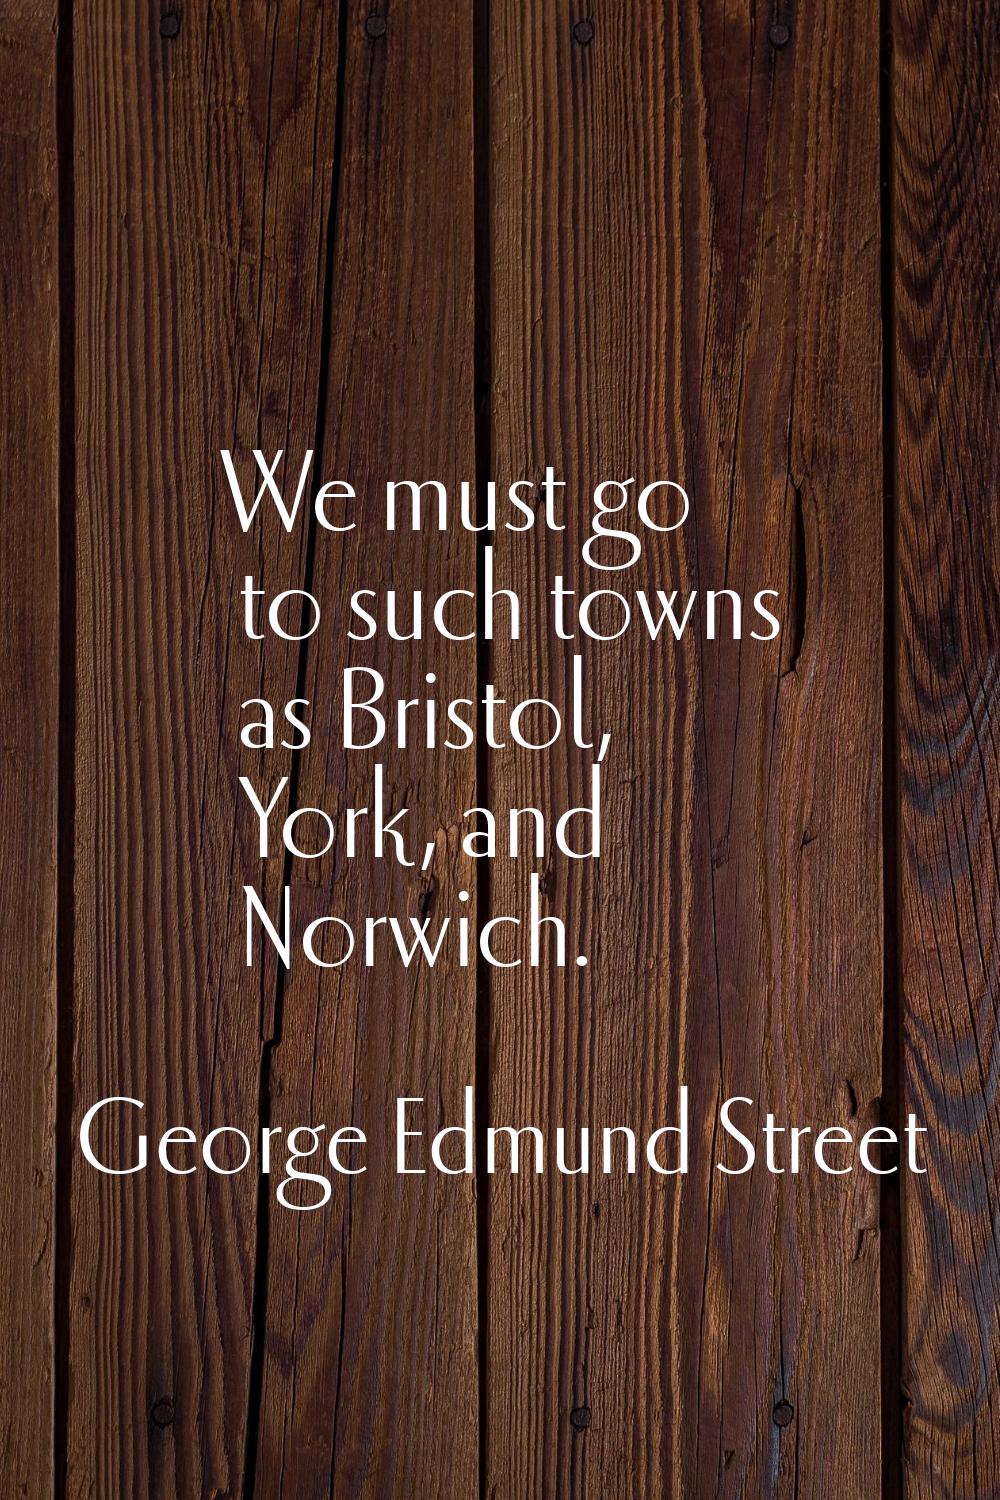 We must go to such towns as Bristol, York, and Norwich.